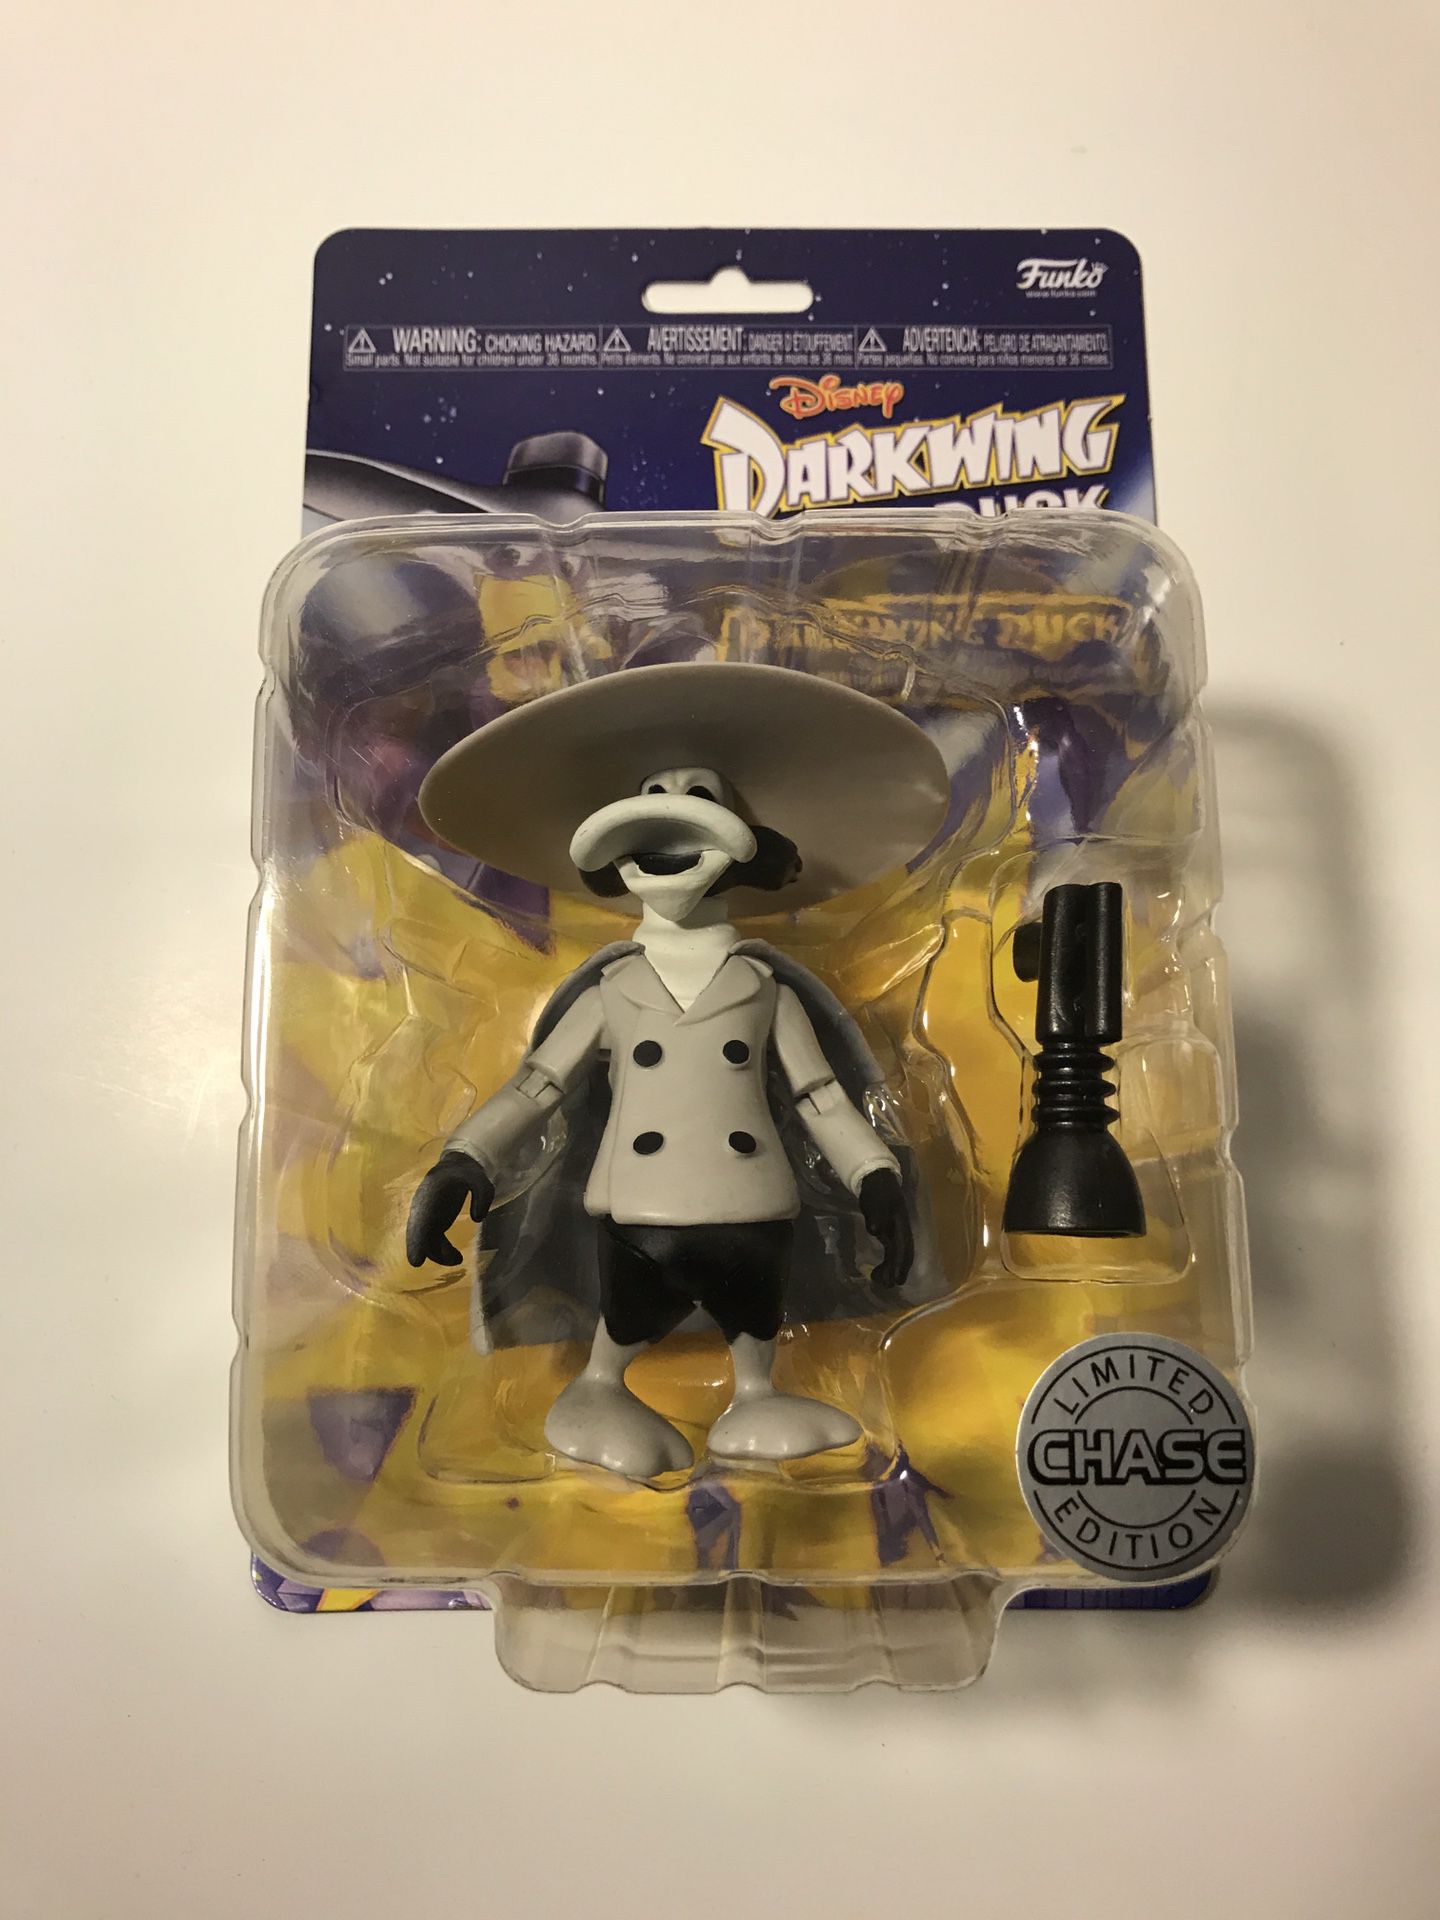 Funko Darkwing Duck special edition action figure